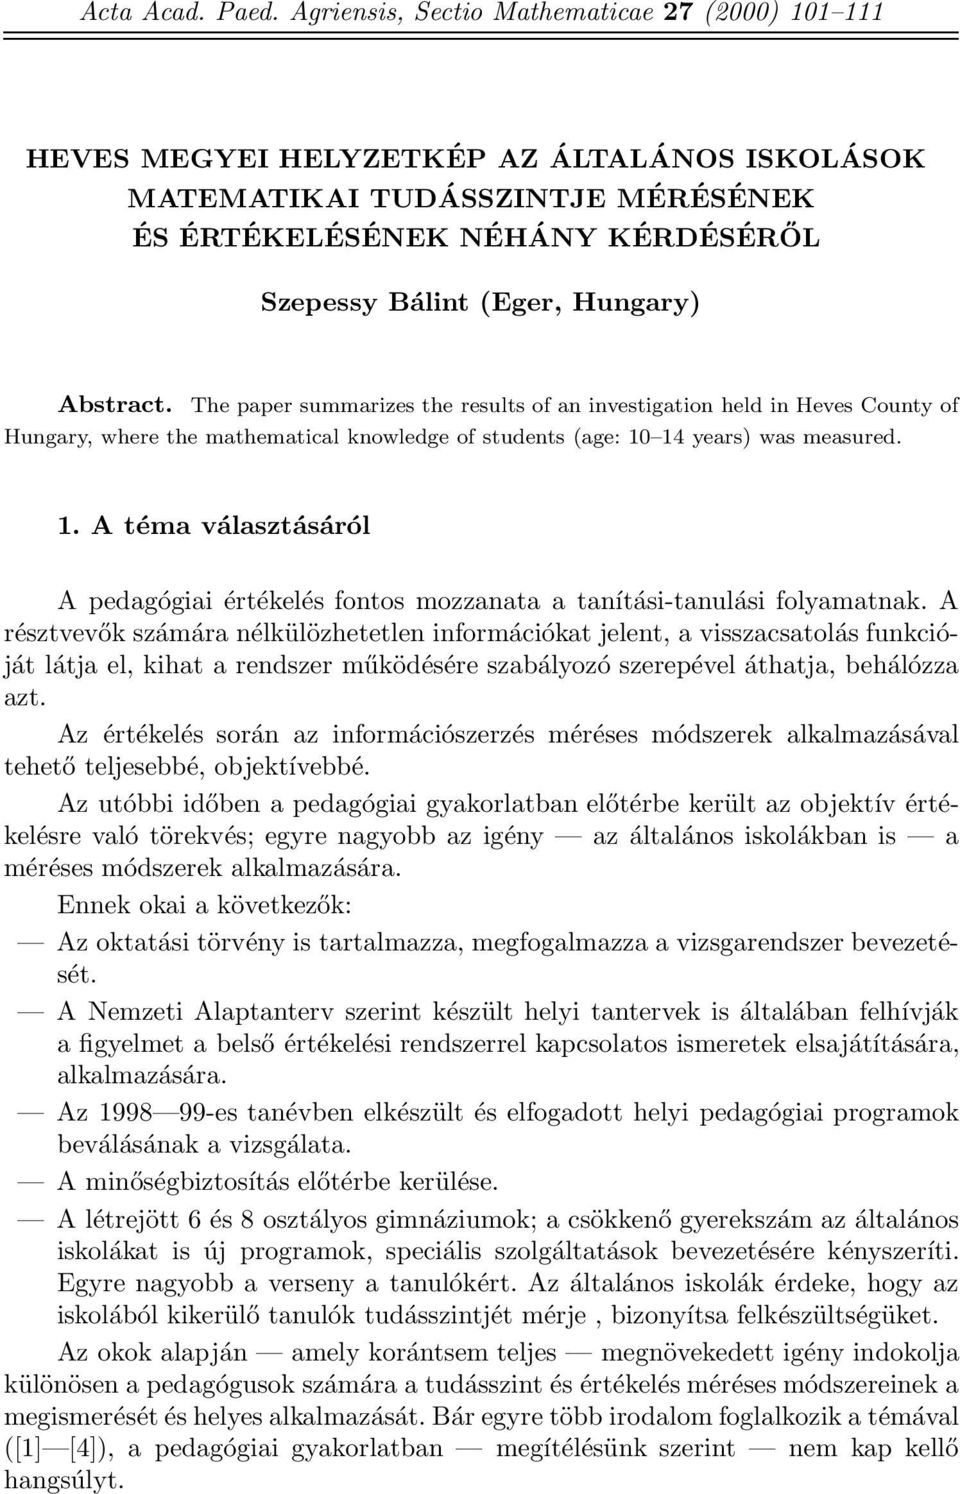 Abstract. The paper summarizes the results of an investigation held in Heves County of Hungary, where the mathematical knowledge of students (age: 10